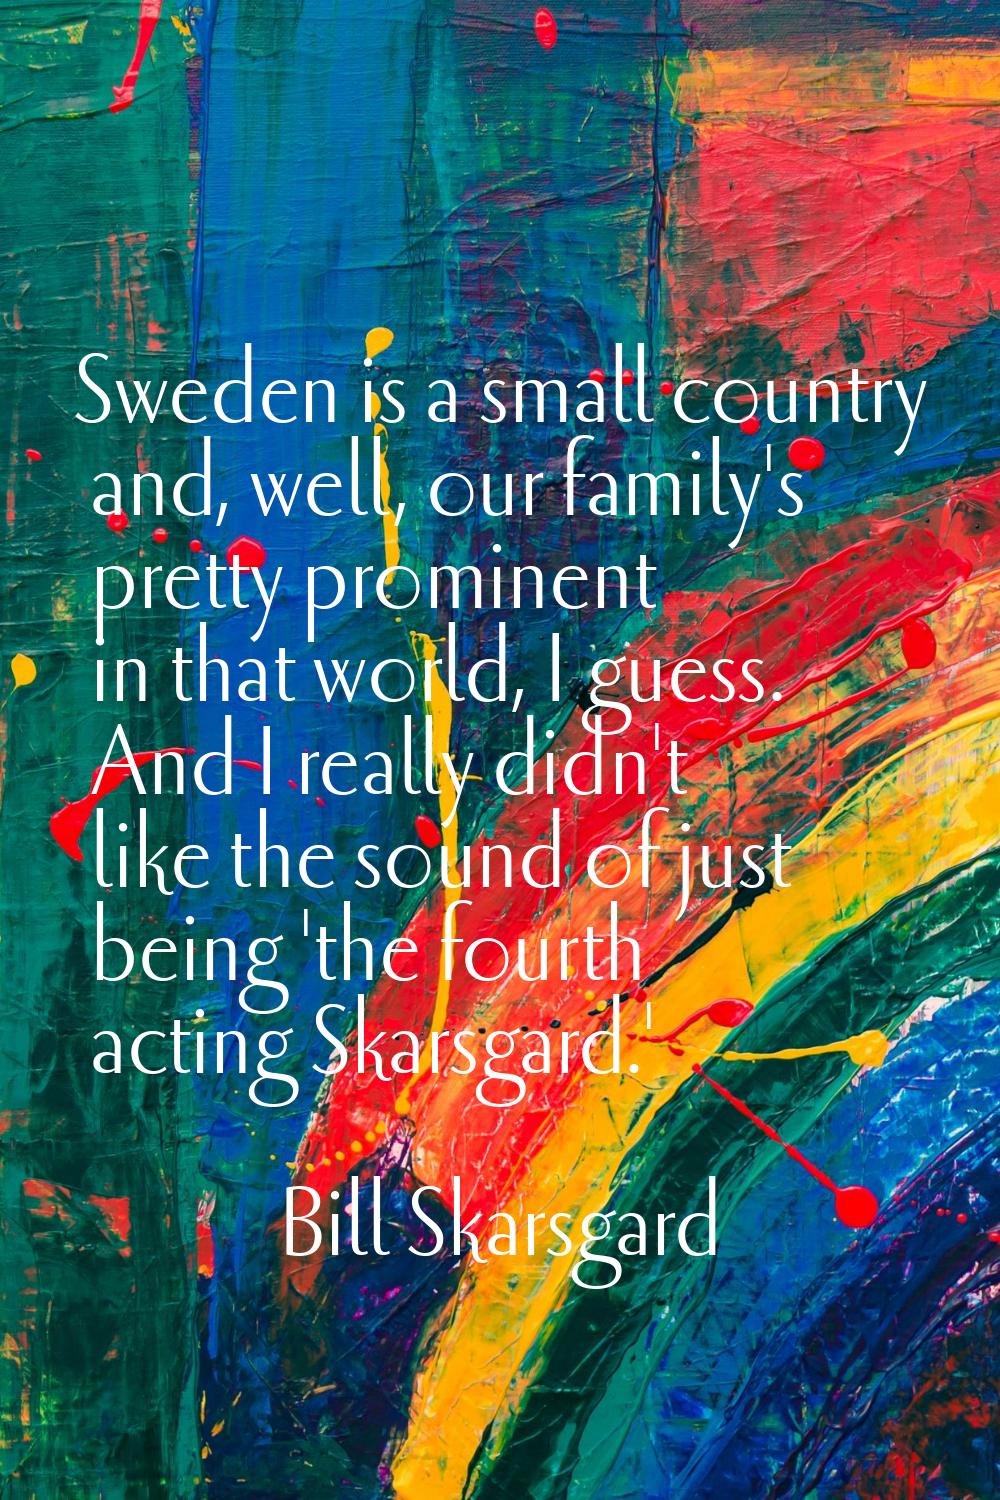 Sweden is a small country and, well, our family's pretty prominent in that world, I guess. And I re